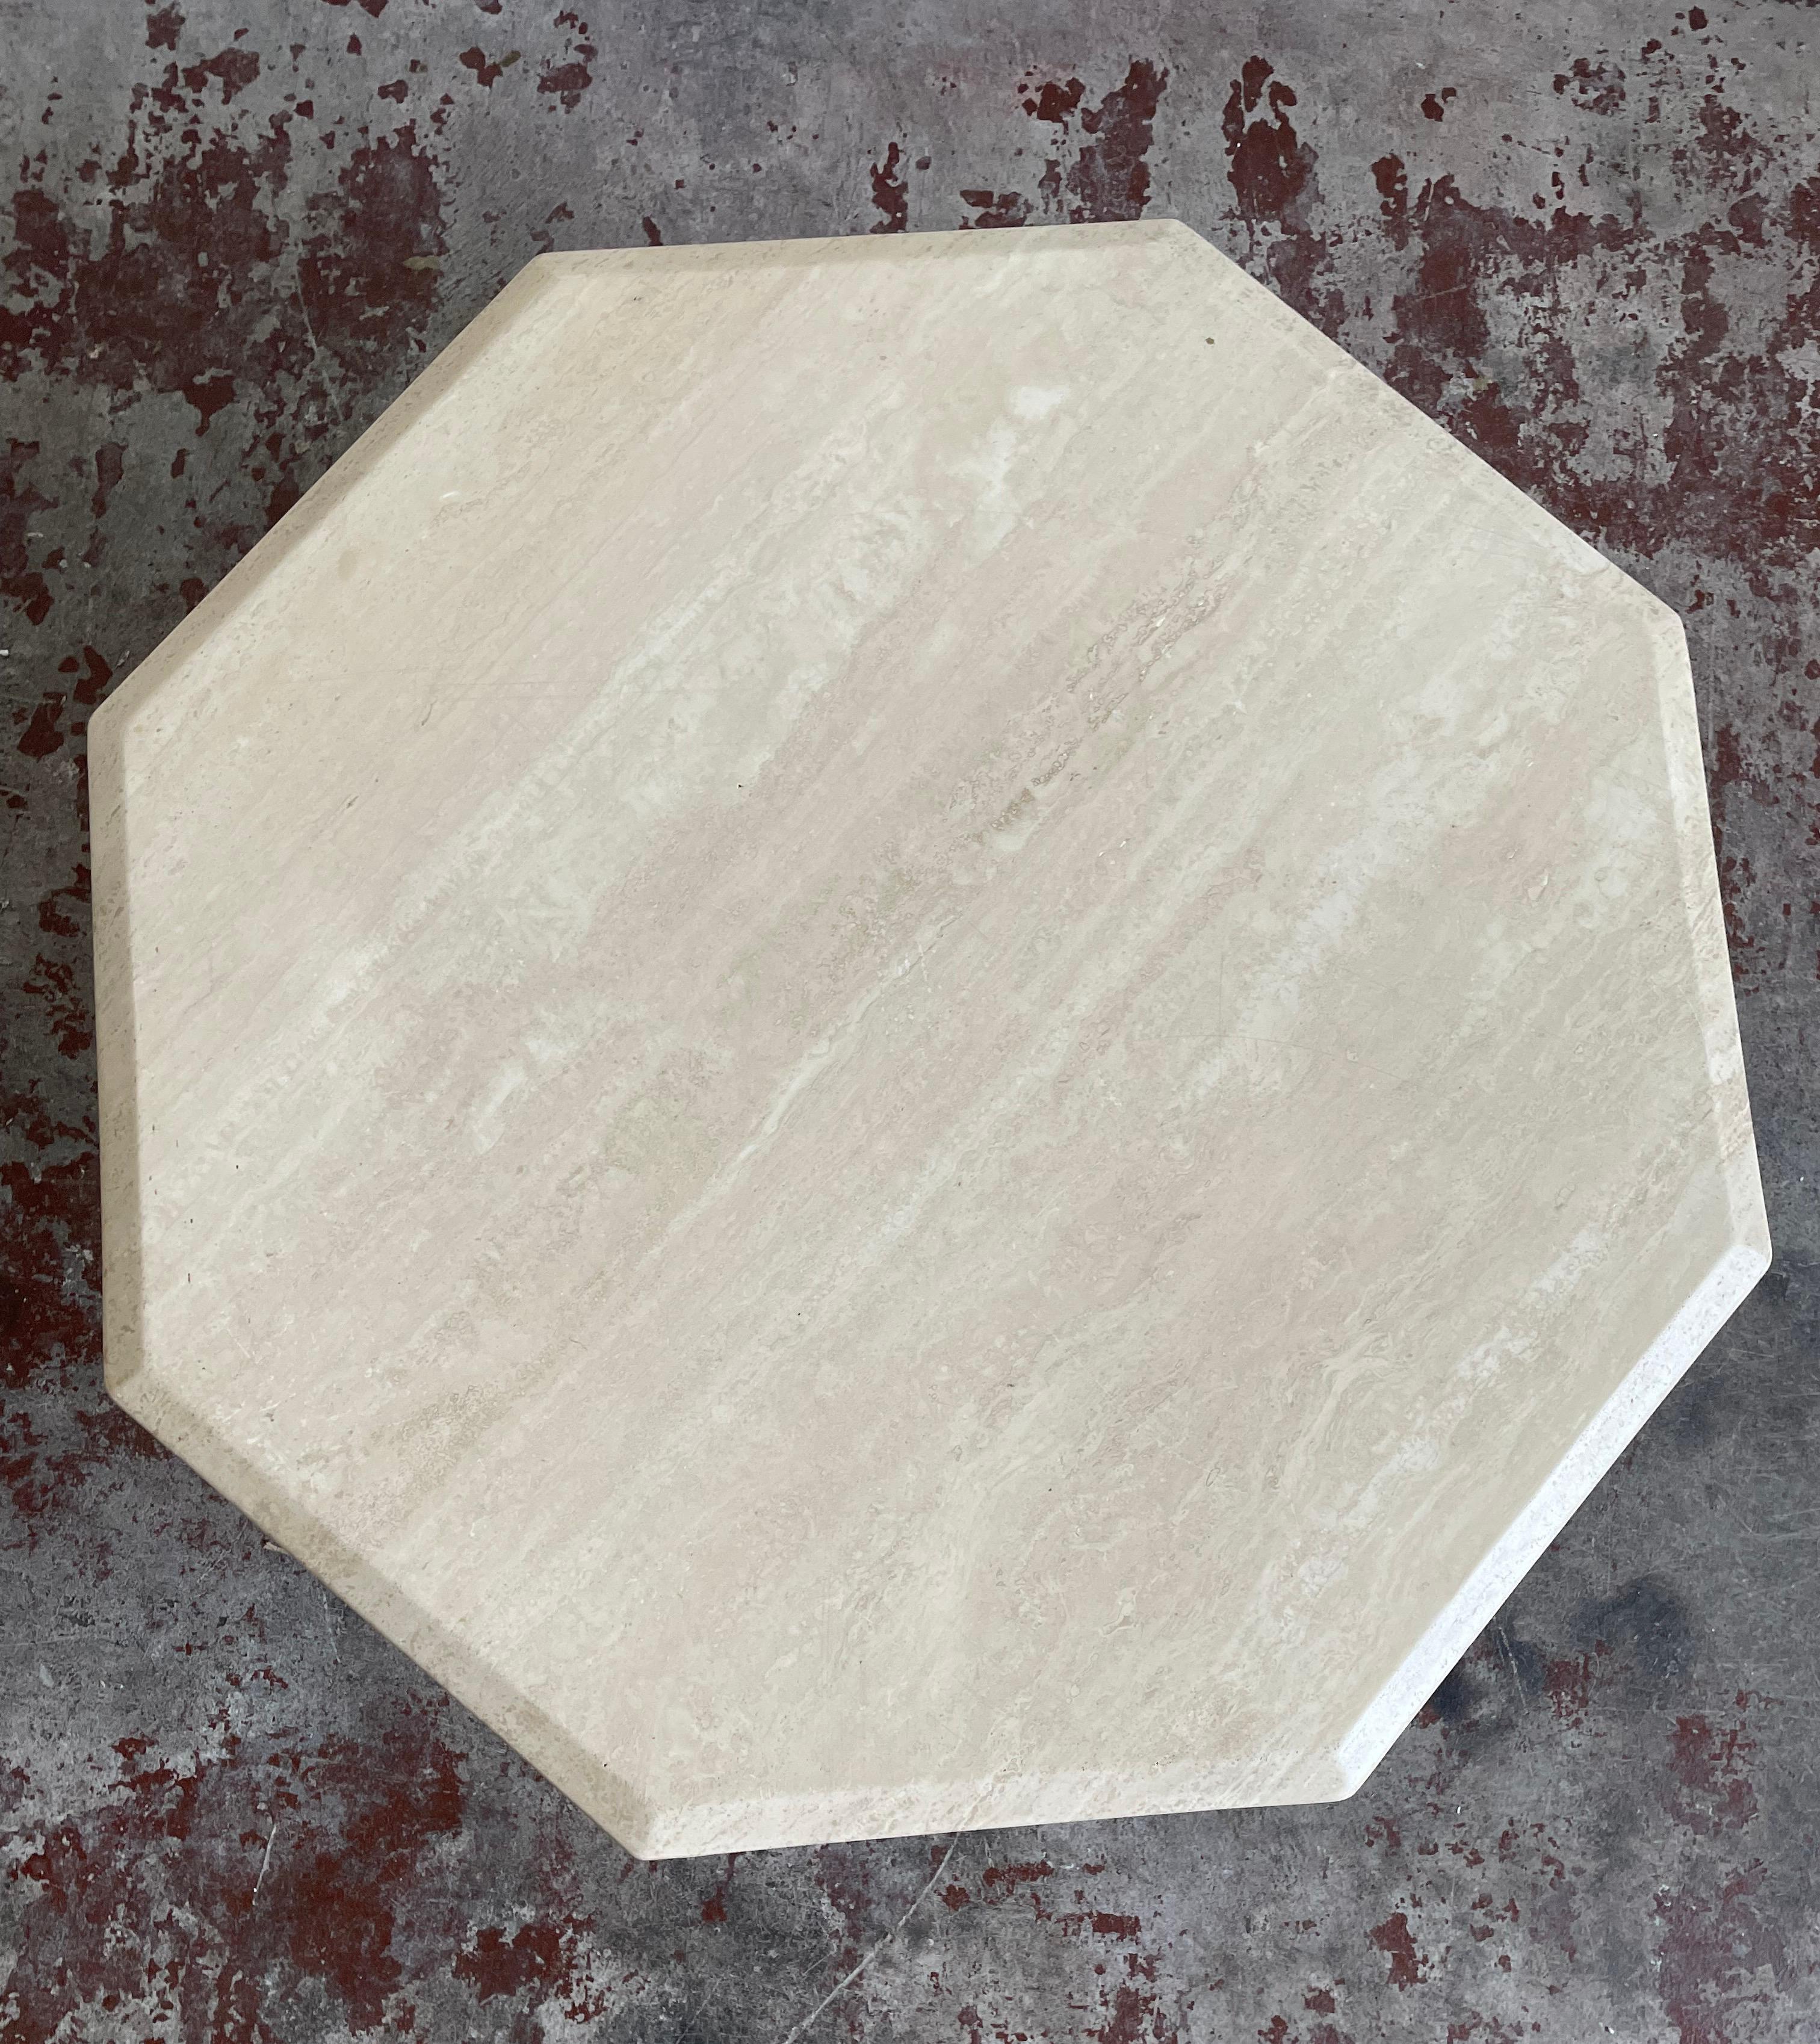 Minimalist Italian coffee table made of travertine stone, manufactured in the 1970s

The table consists of freestanding octagonal-shaped table top and triangle-shaped base

The table remains in very good vintage condition, without visible